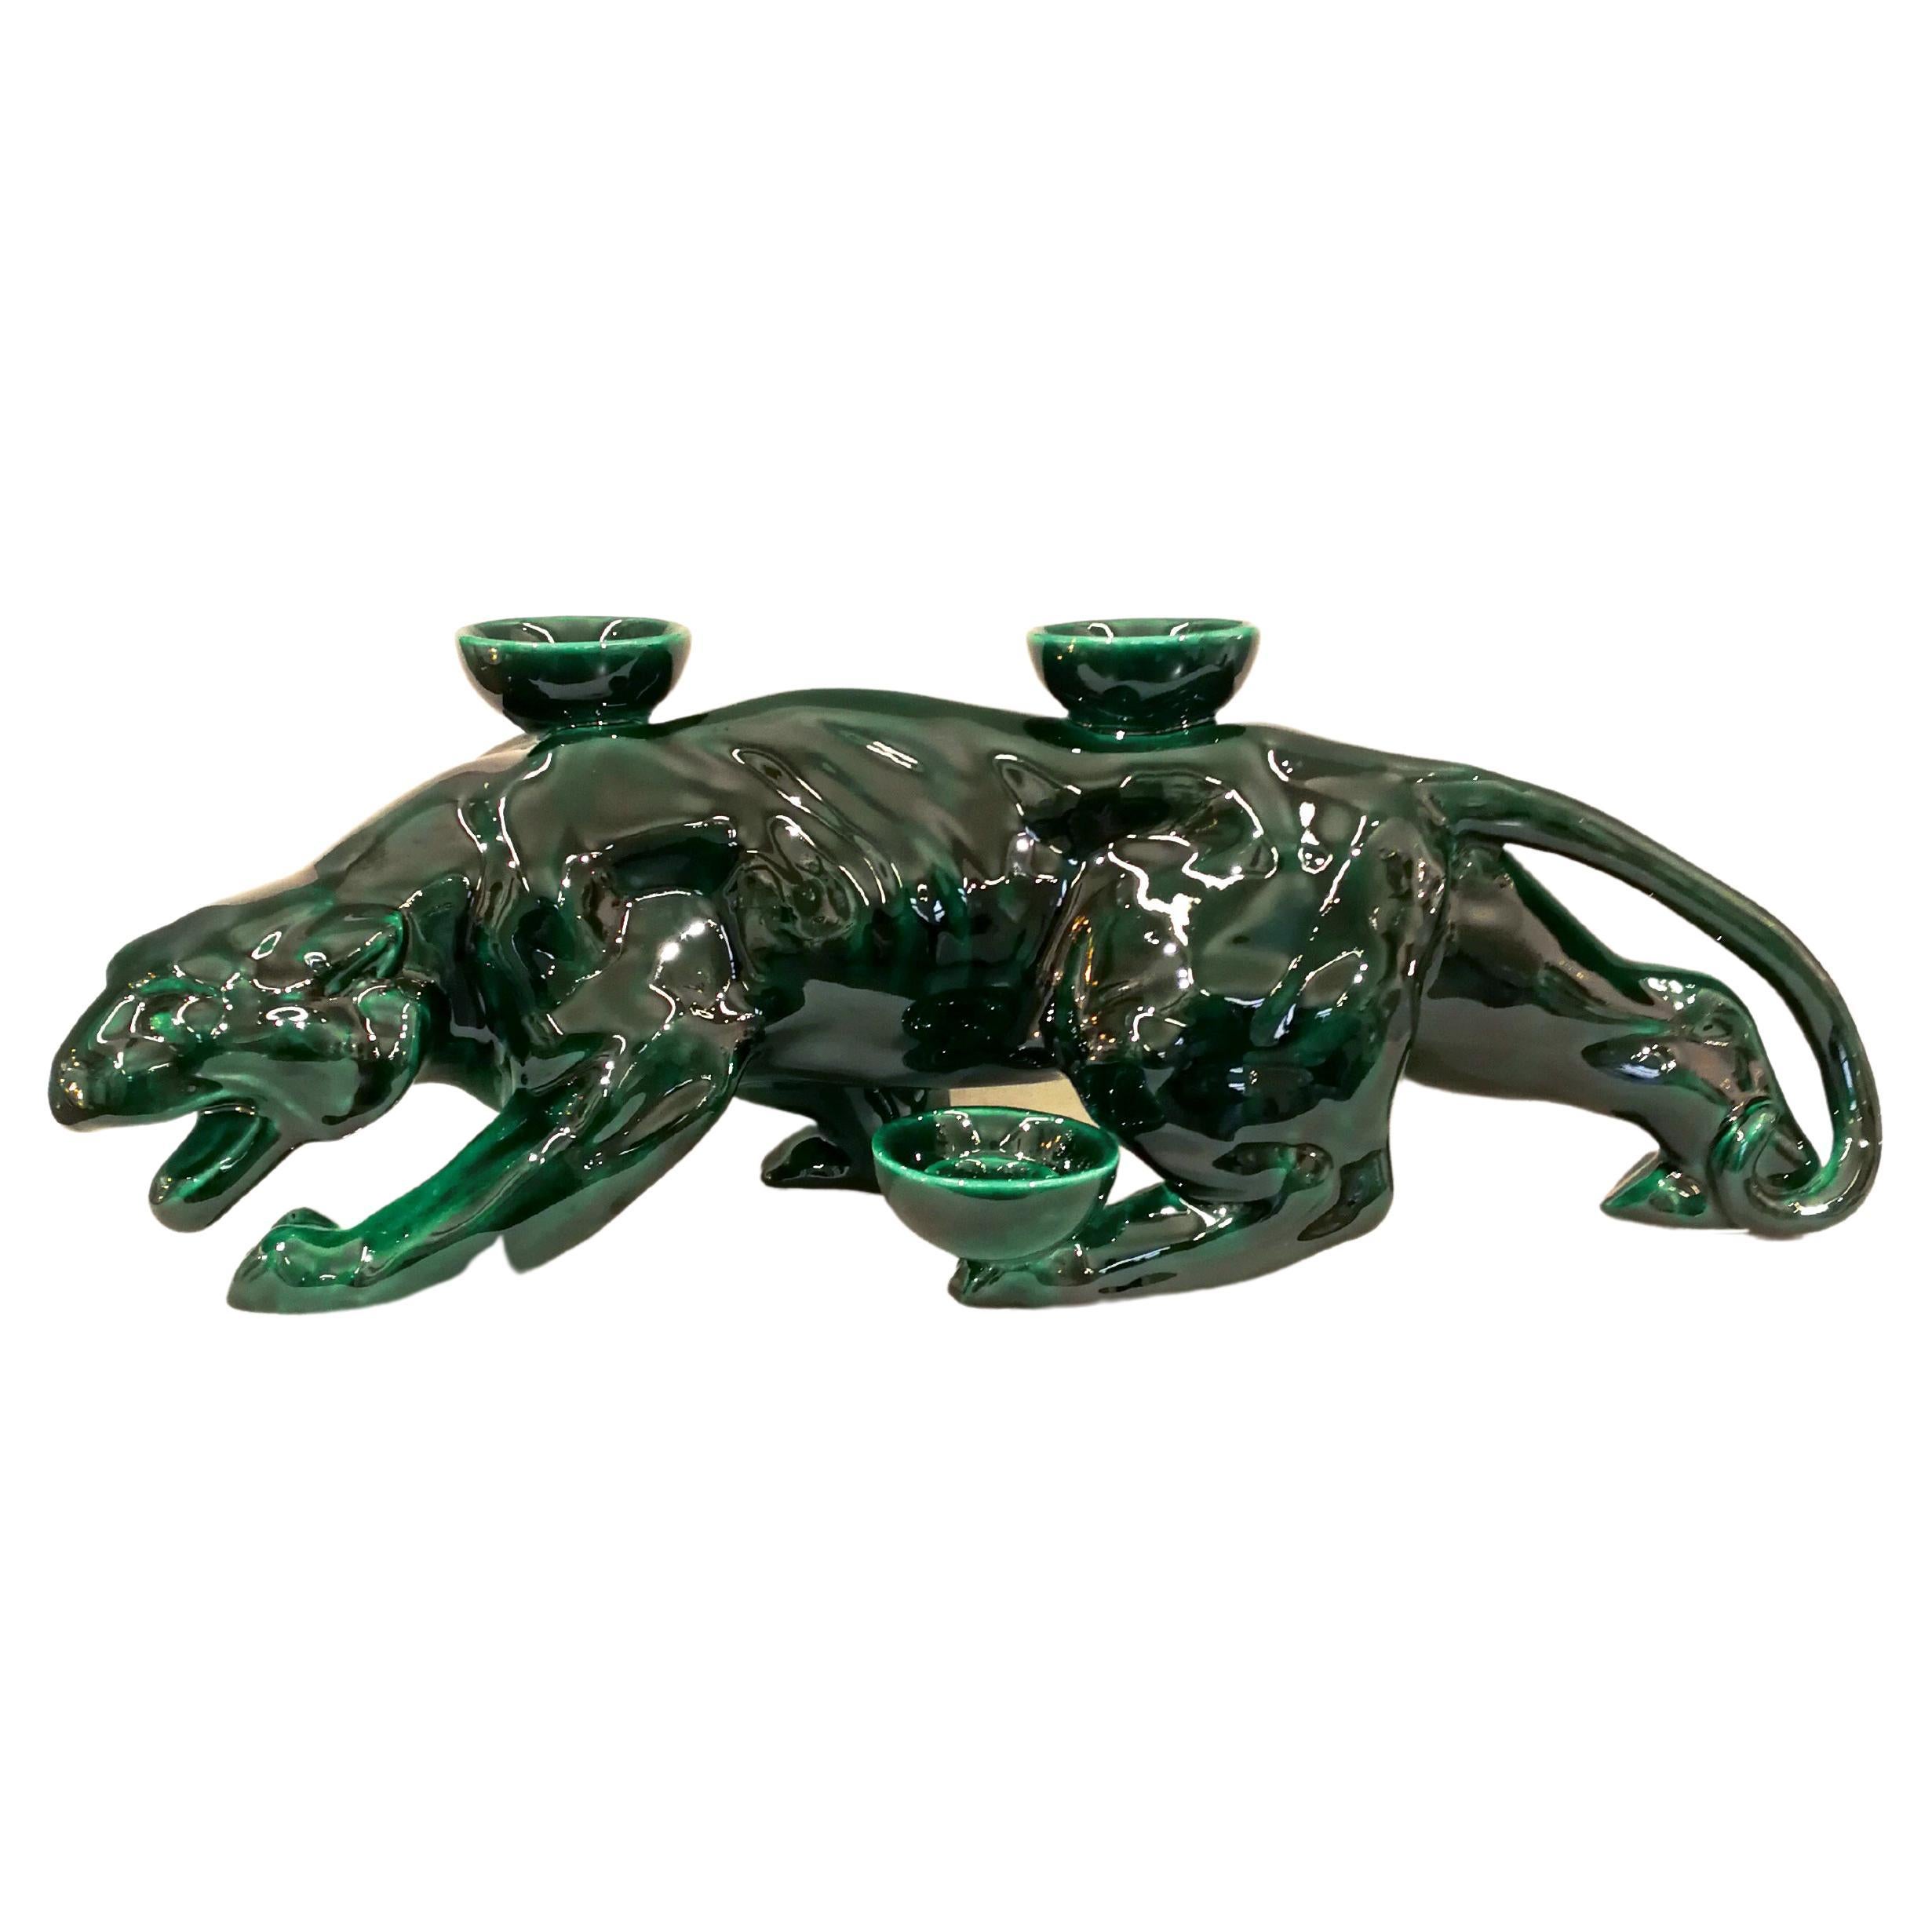 Modern Ceramica Gatti 1928 Ceramic Green Forest Panther Candle Holder For Sale